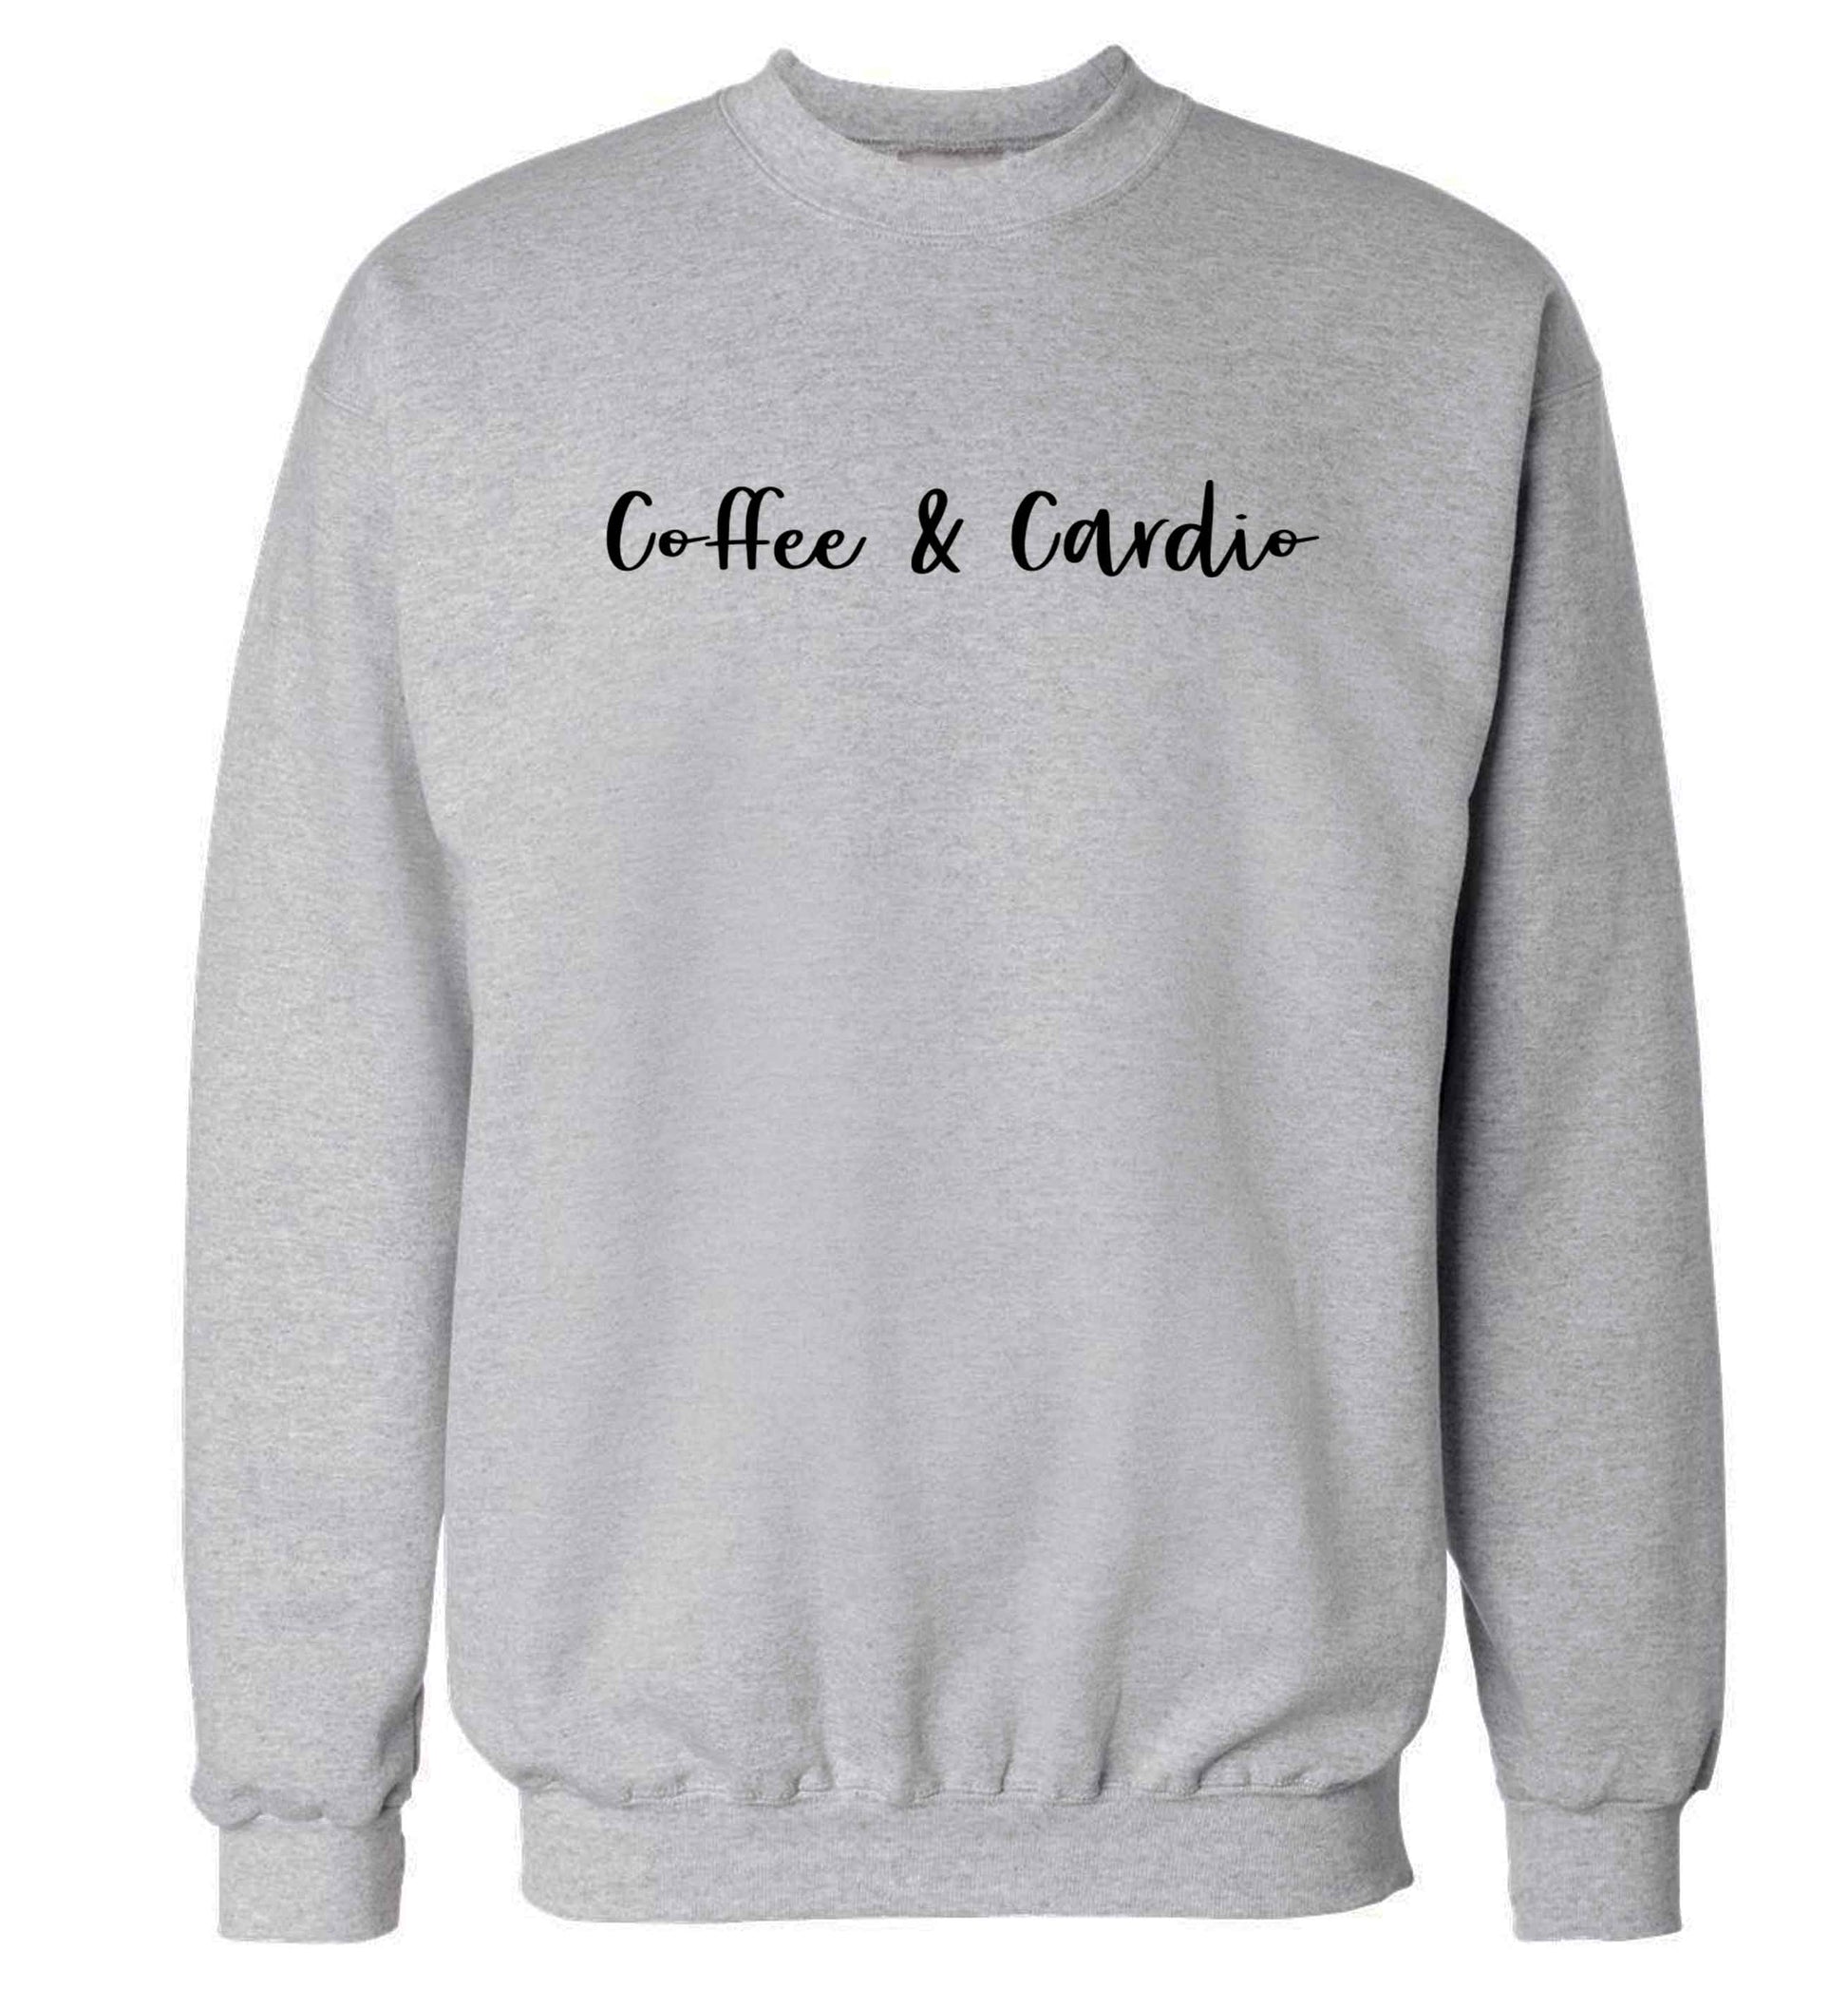 Coffee and cardio Adult's unisex grey Sweater 2XL